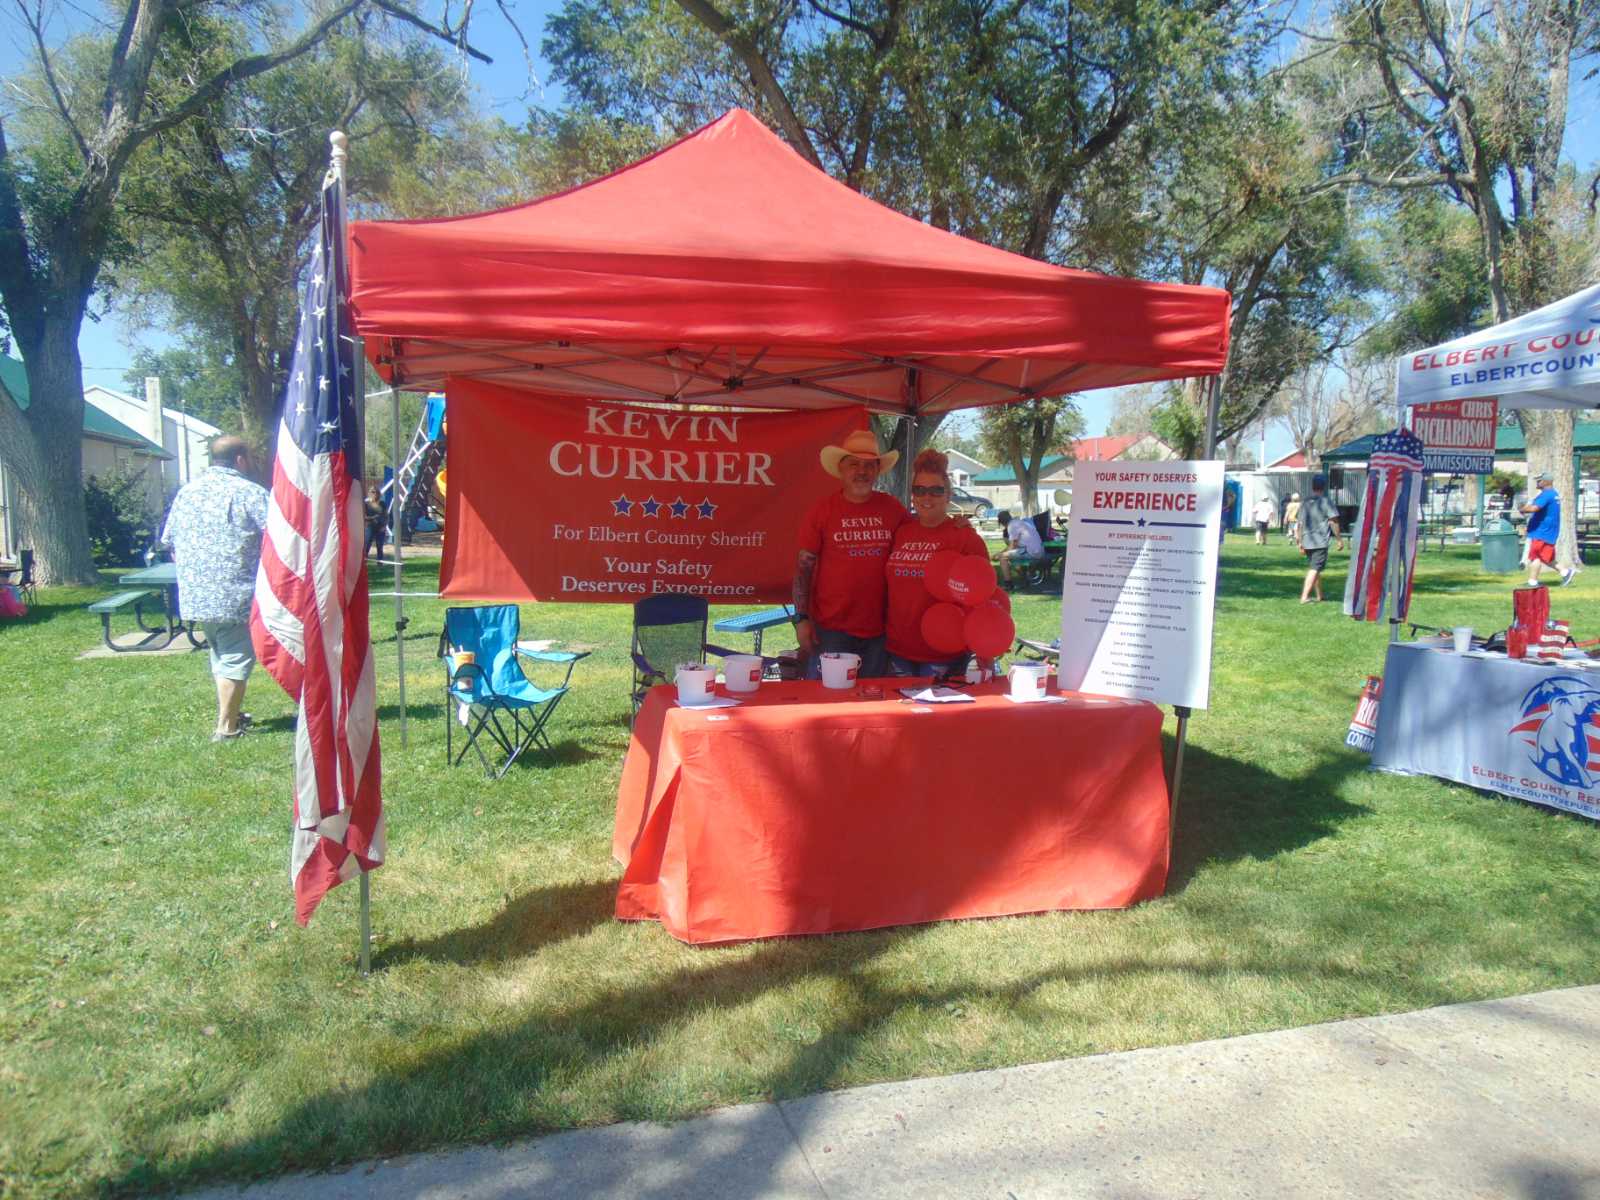 2021 Simla Day Vendor Kevin Currier for Sheriff